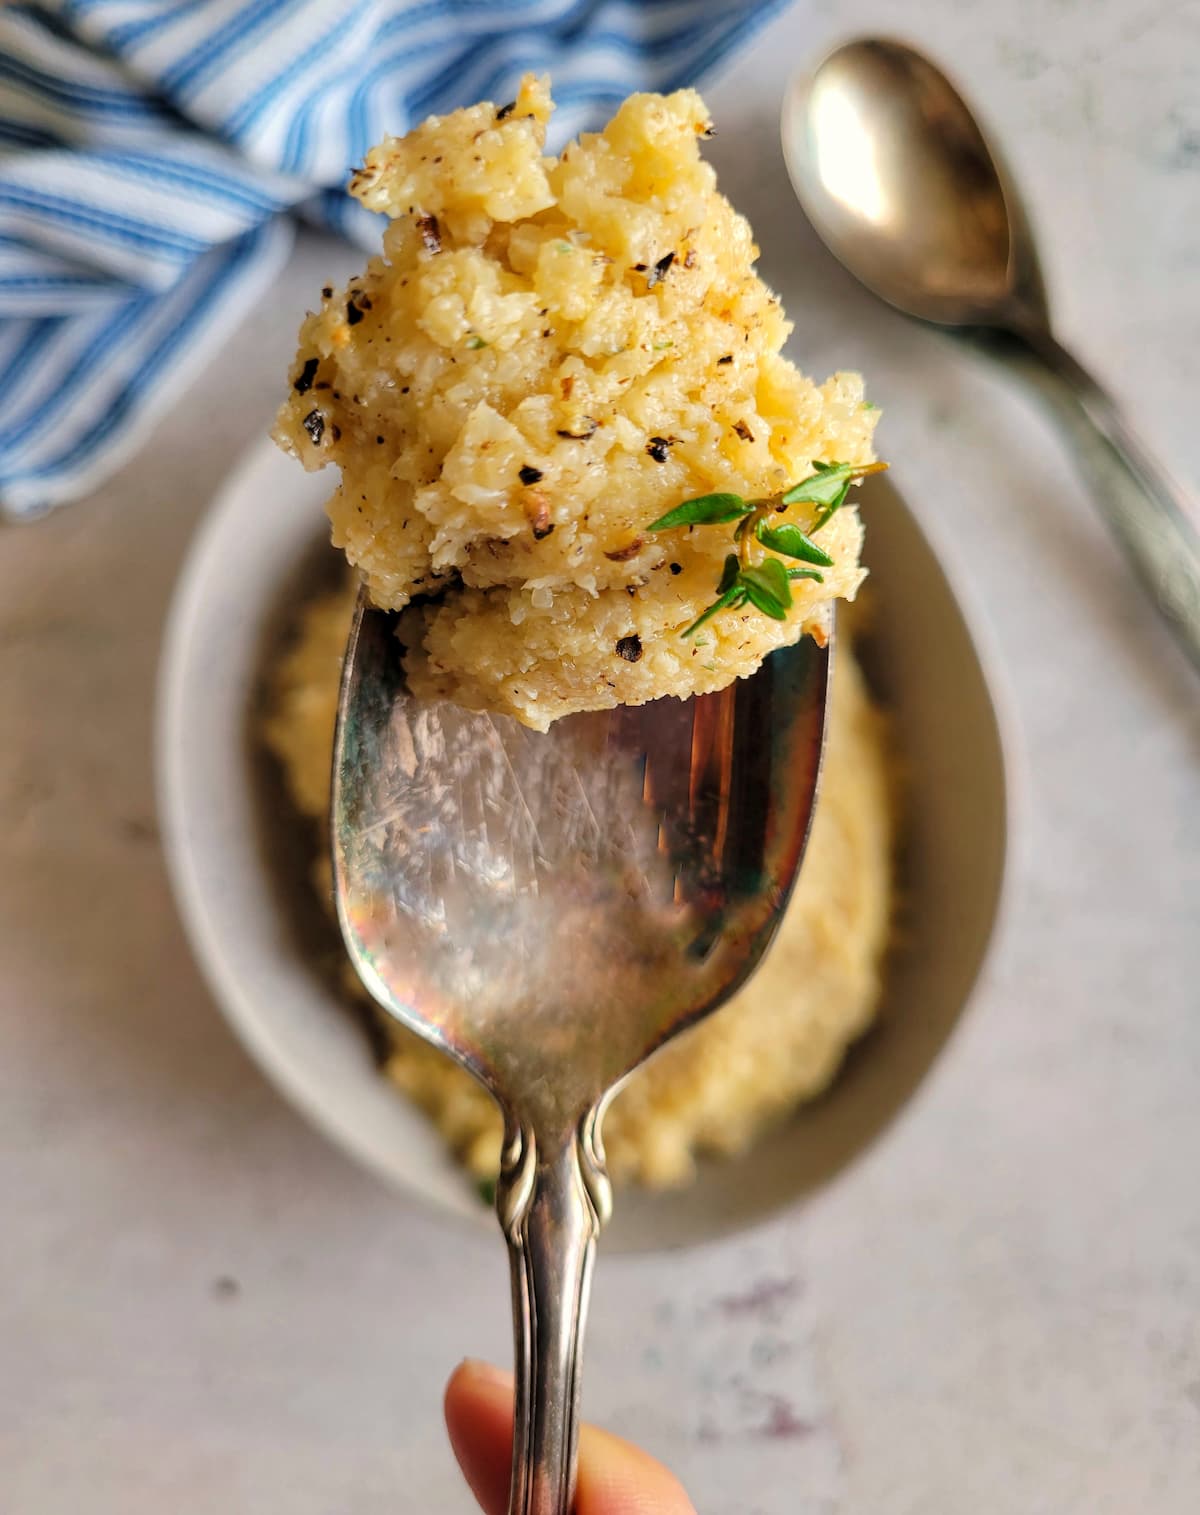 spoon with some mashed cauliflower on it garnished with fresh cracked pepper and thyme